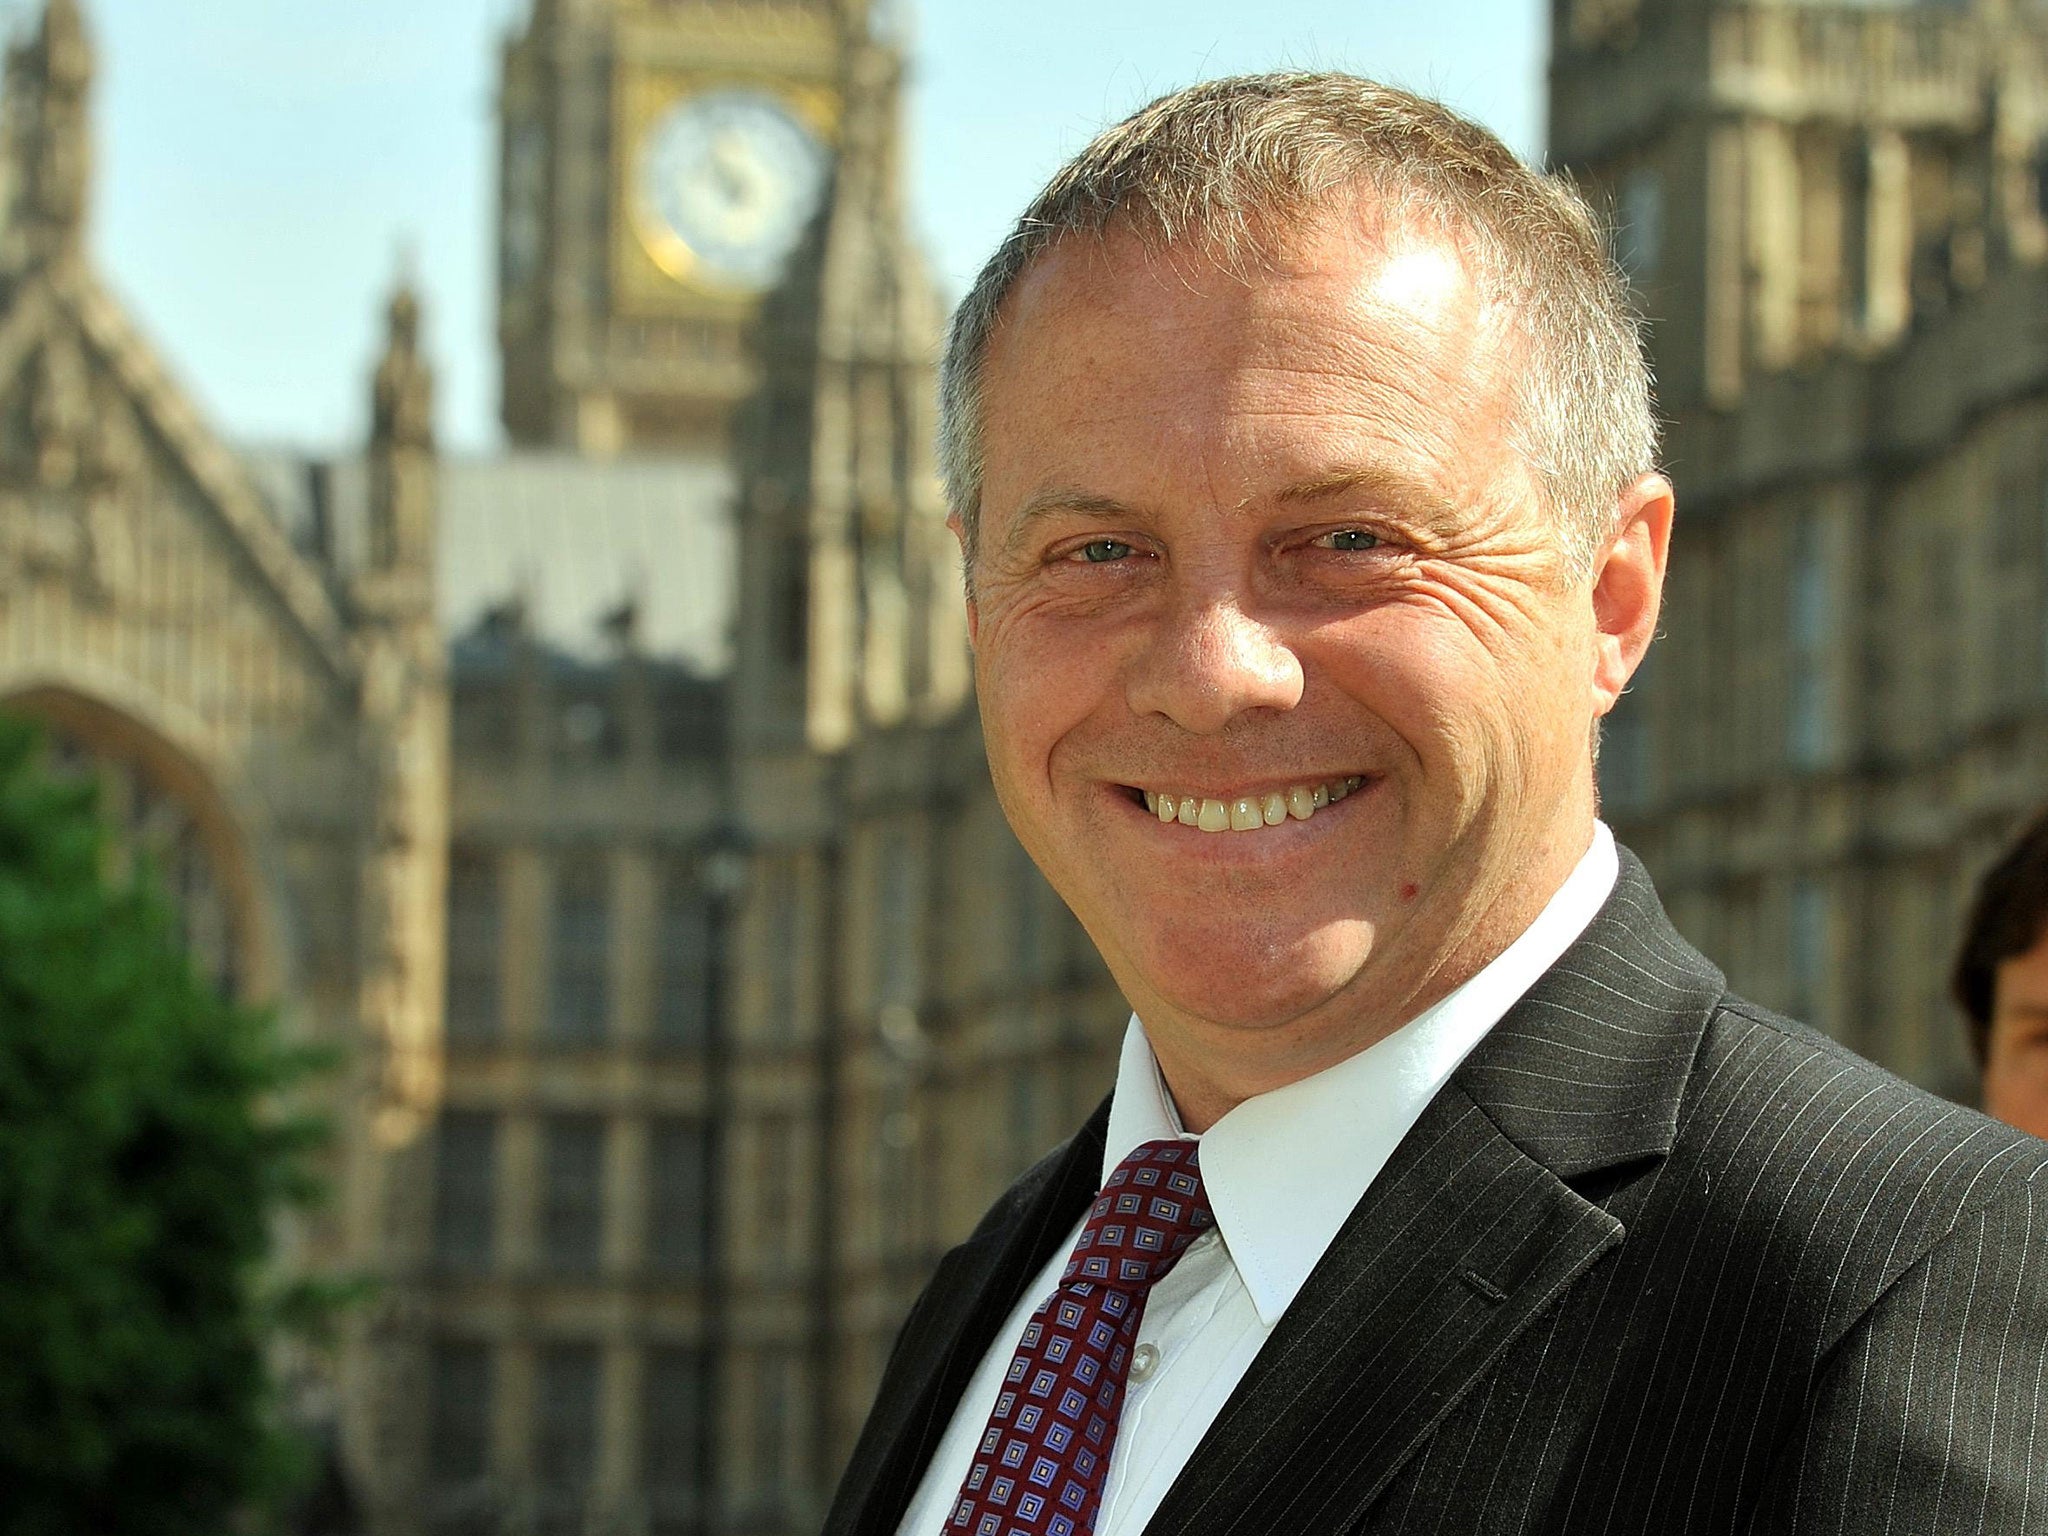 Labour MP John Mann has named 22 politicians as suspected child sex abusers